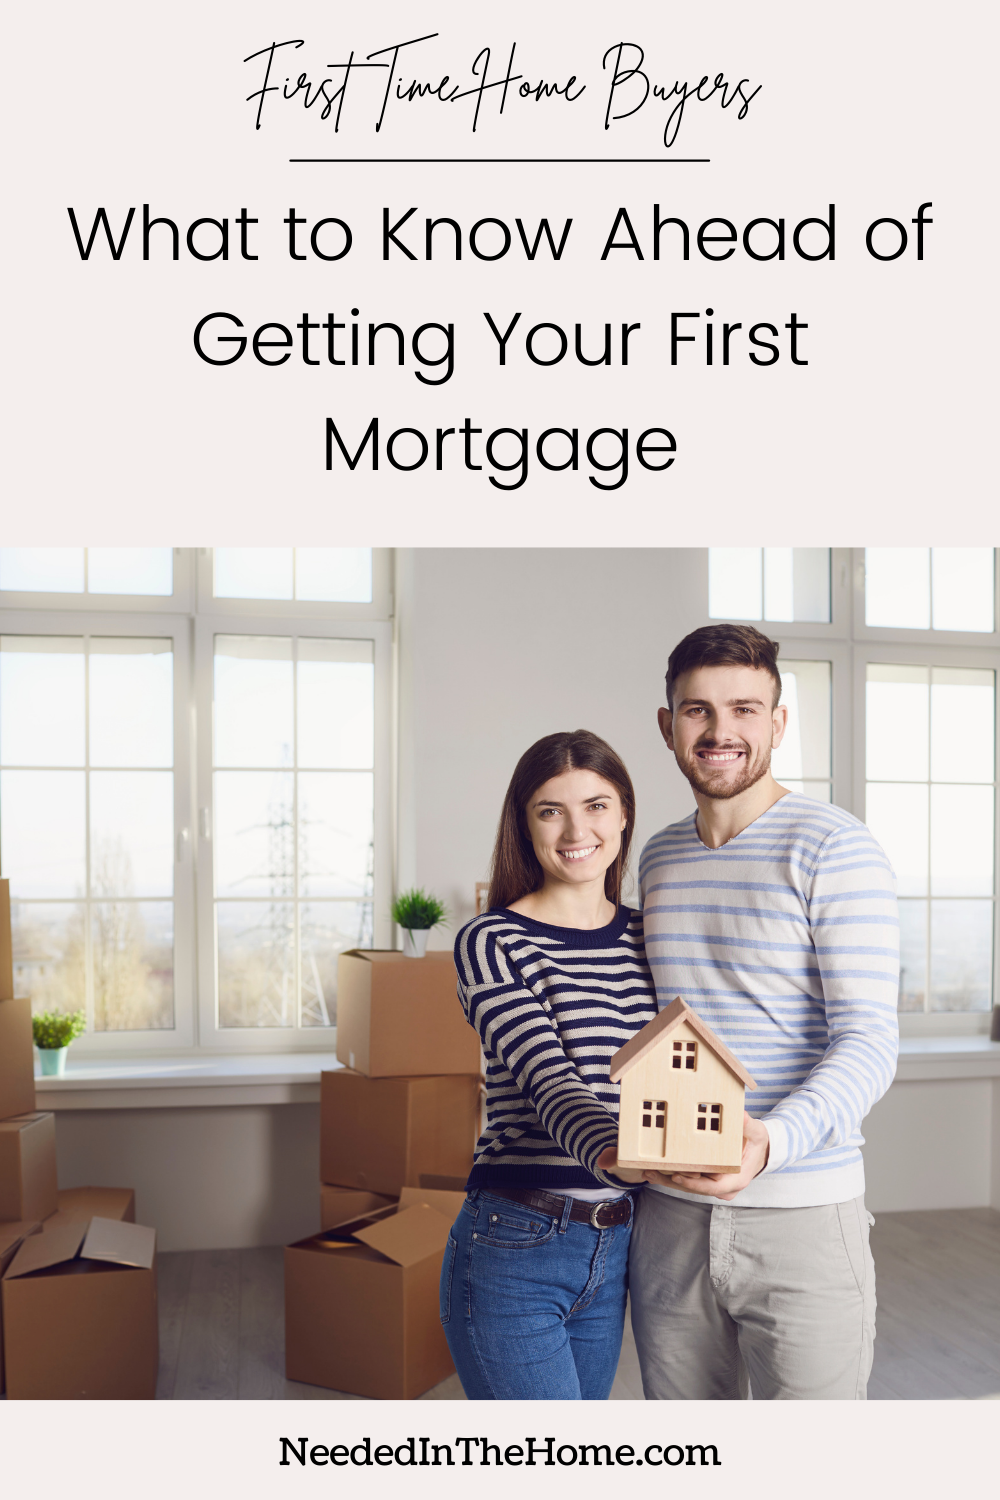 pinterest-pin-description first time home buyer what to know ahead of getting your first mortgage smiling young married couple woman man holding wooden house with cardboard boxes background standing in new home neededinthehome